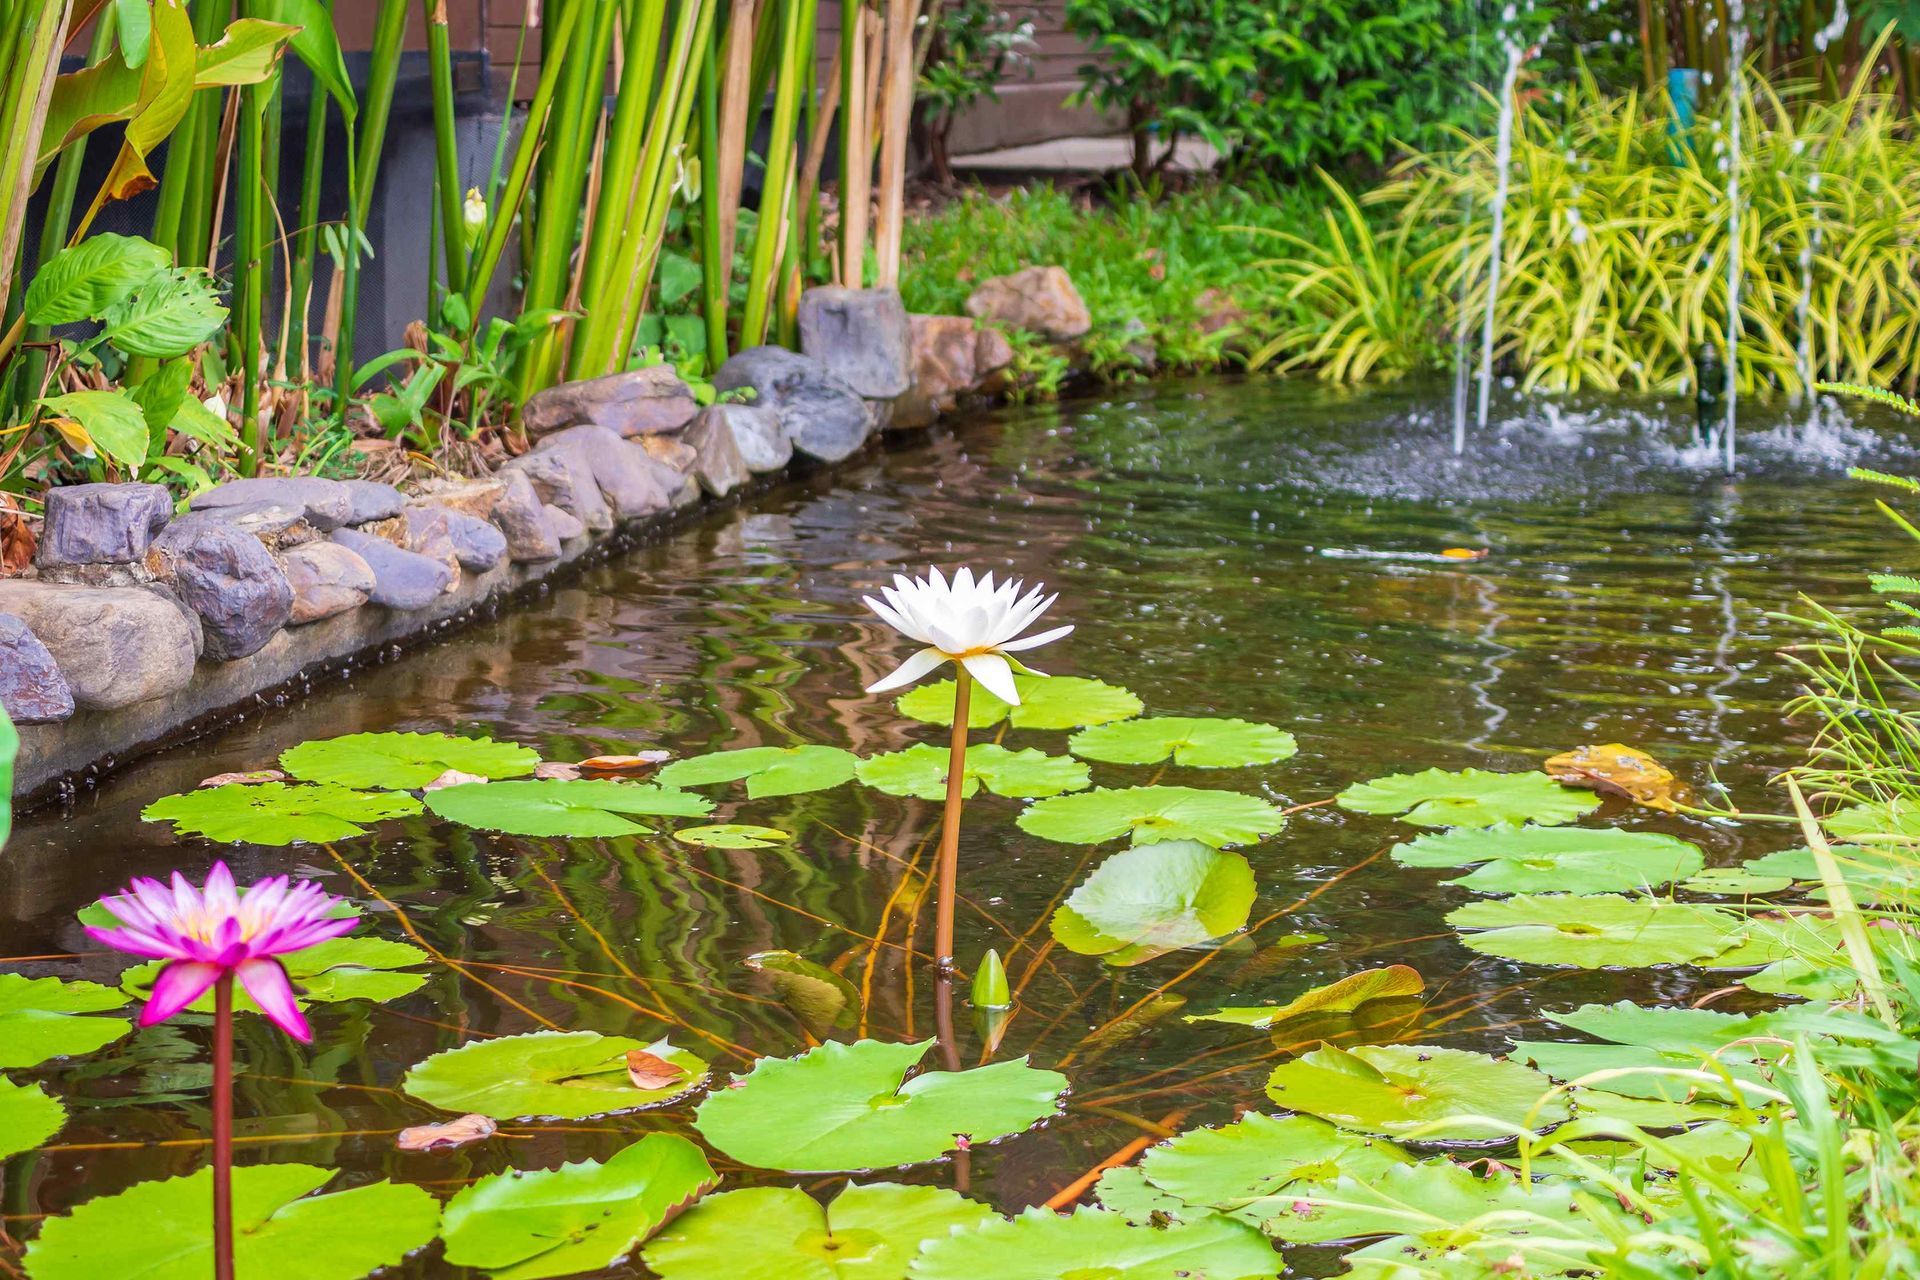 A white water lily growing in a backyard pond